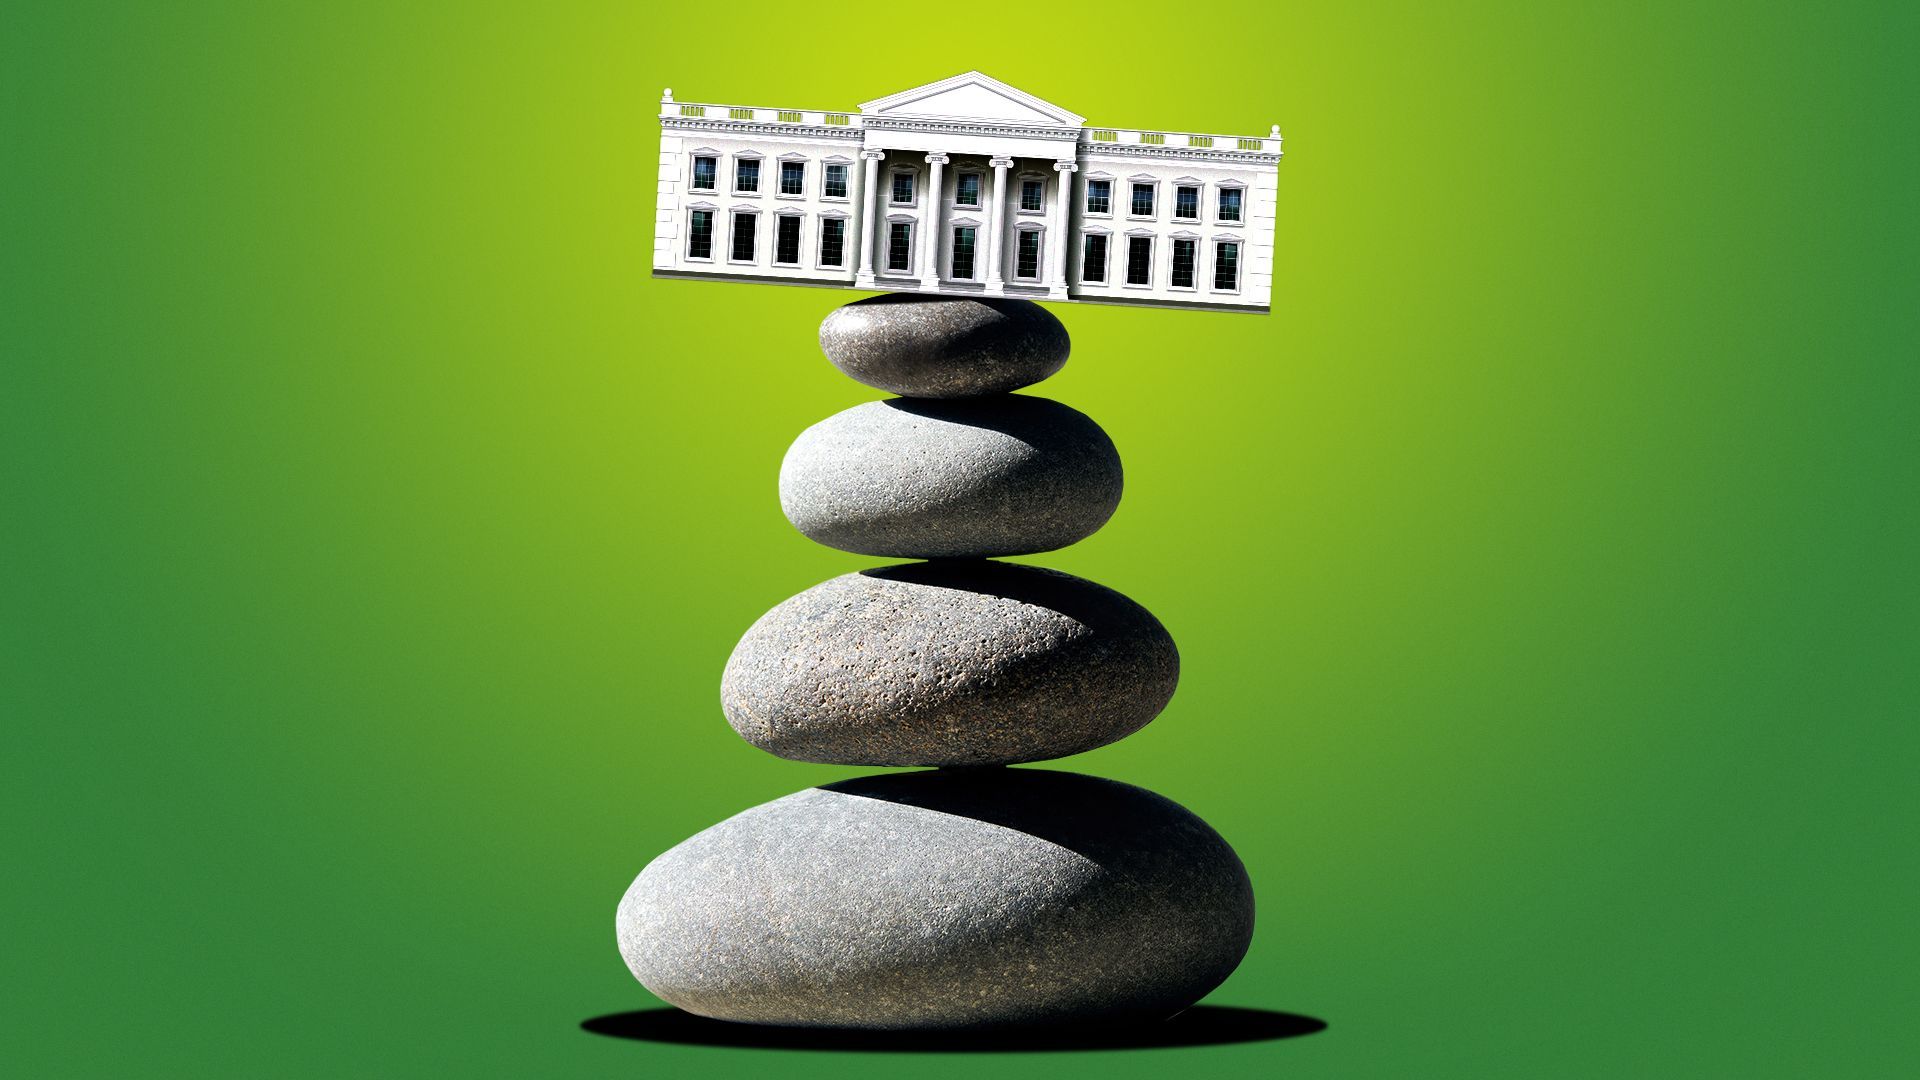 Illustration of the White House balancing on a stack of zen pebble stones